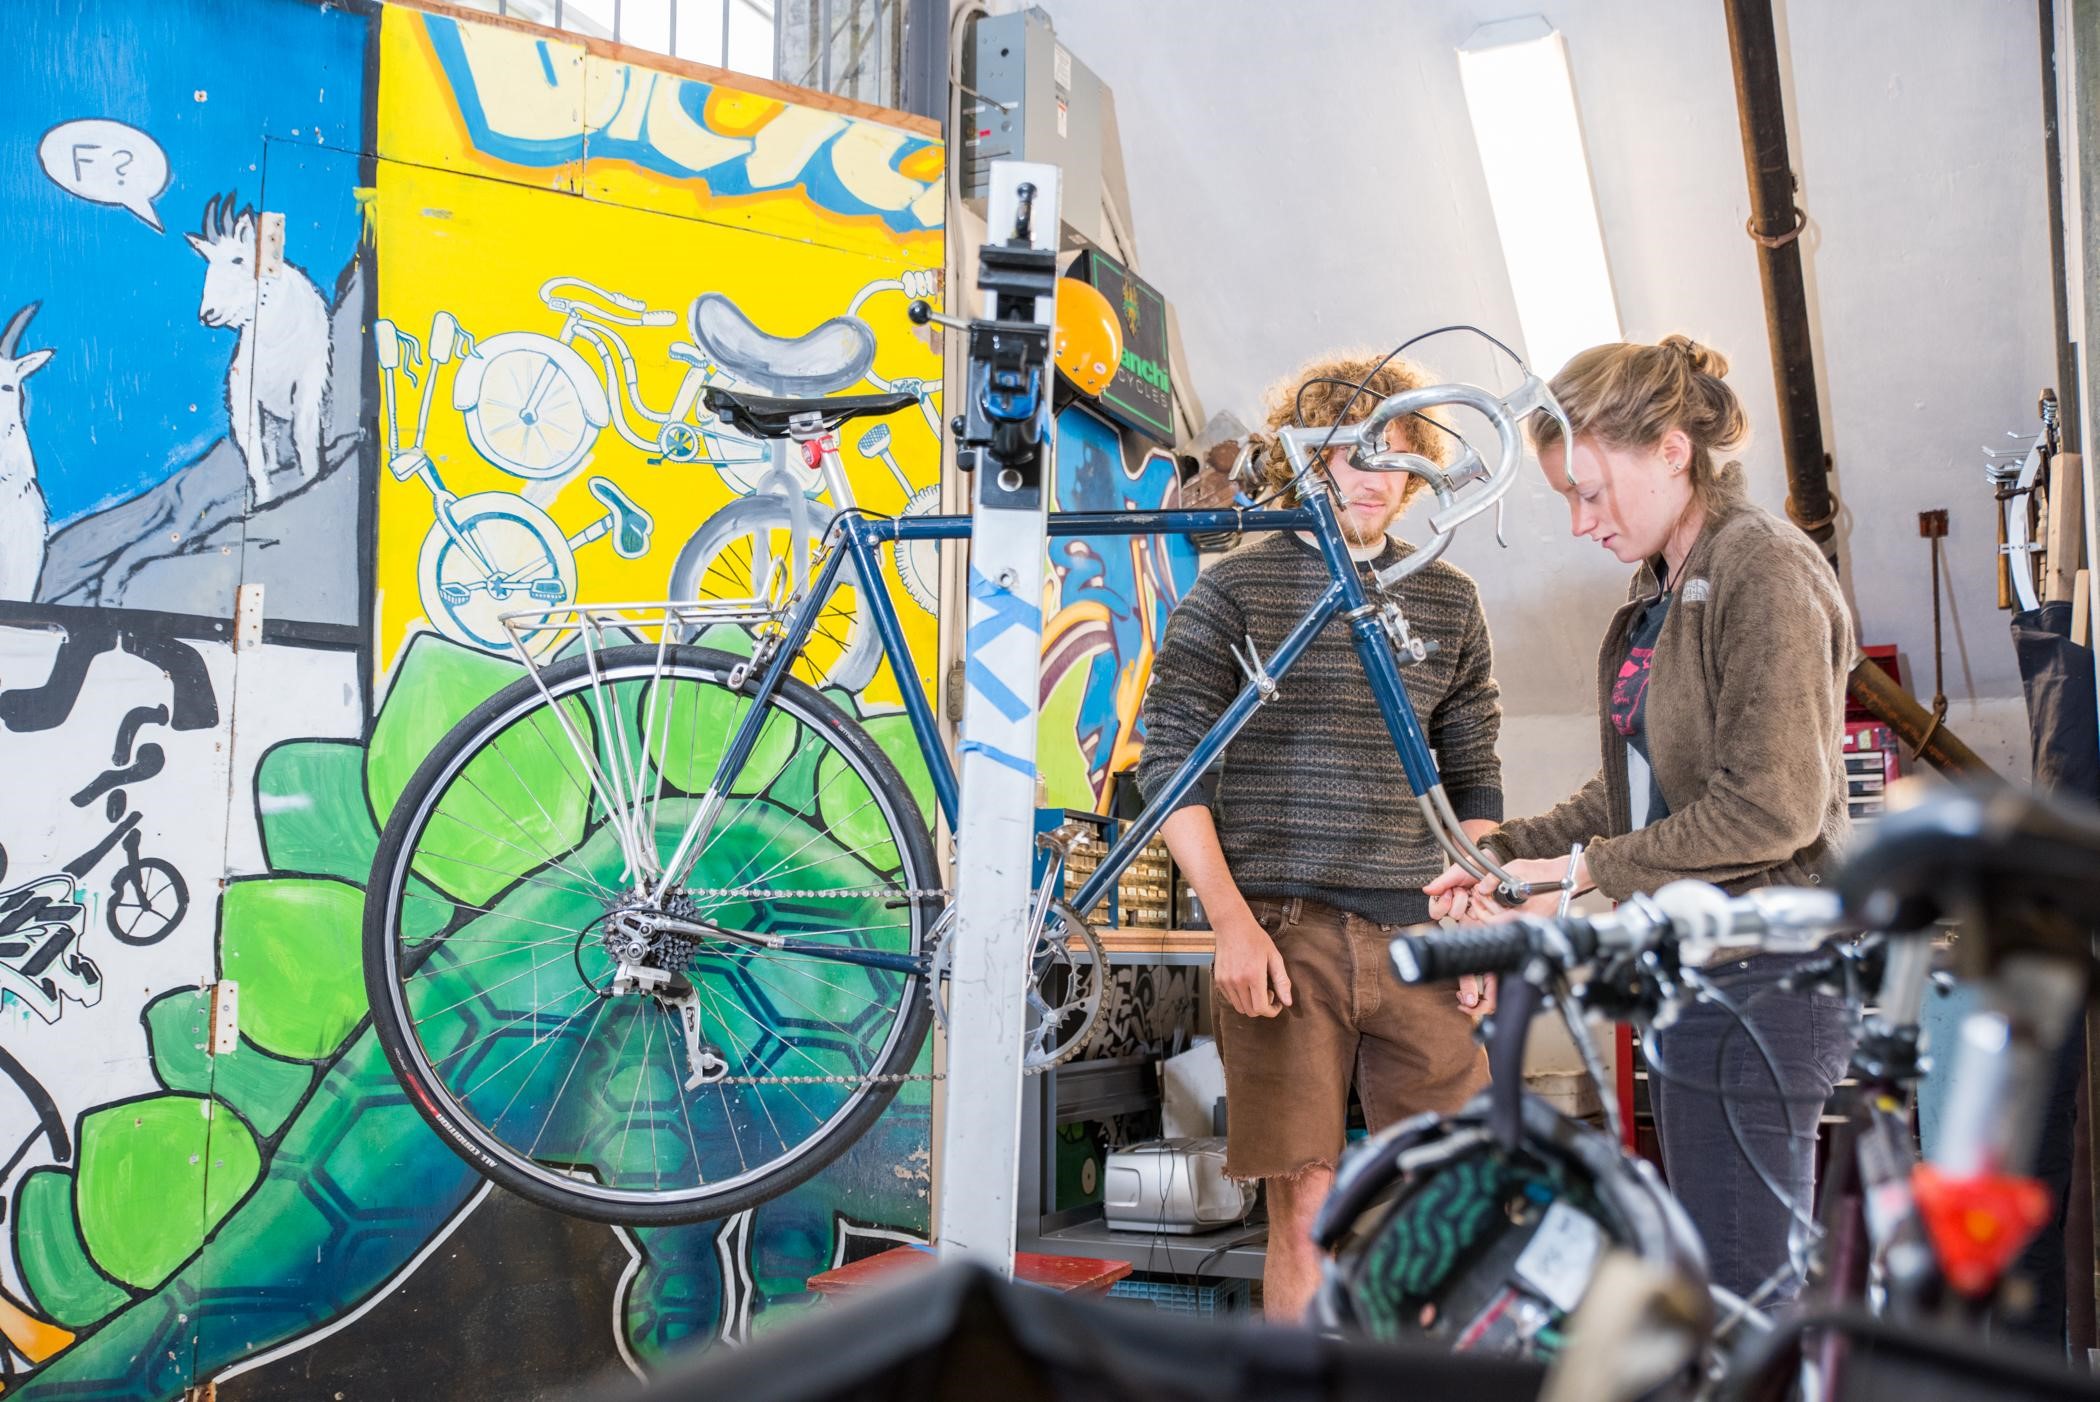 What You Need To Know About SLO's Bike Kitchen Expressions